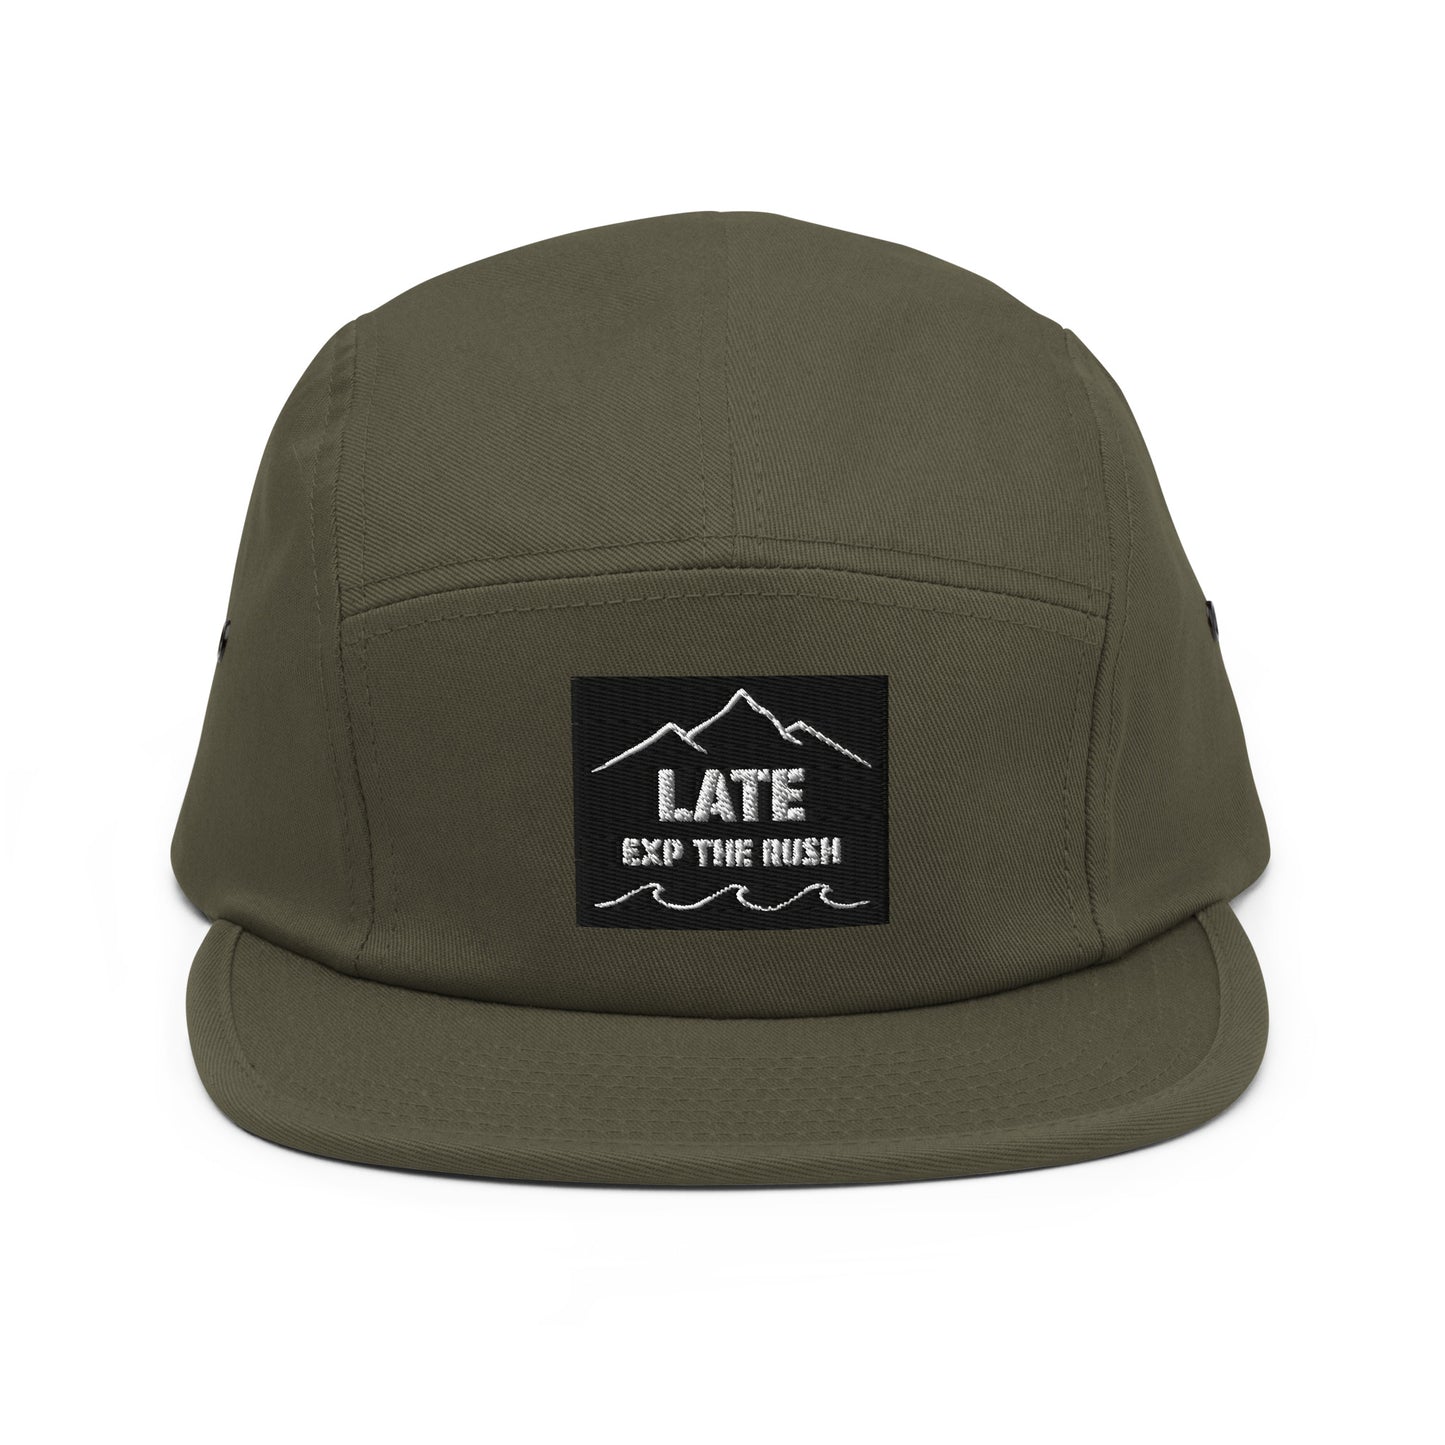 Five Panel Cap Surf vintage Exp The Rush Late olive face